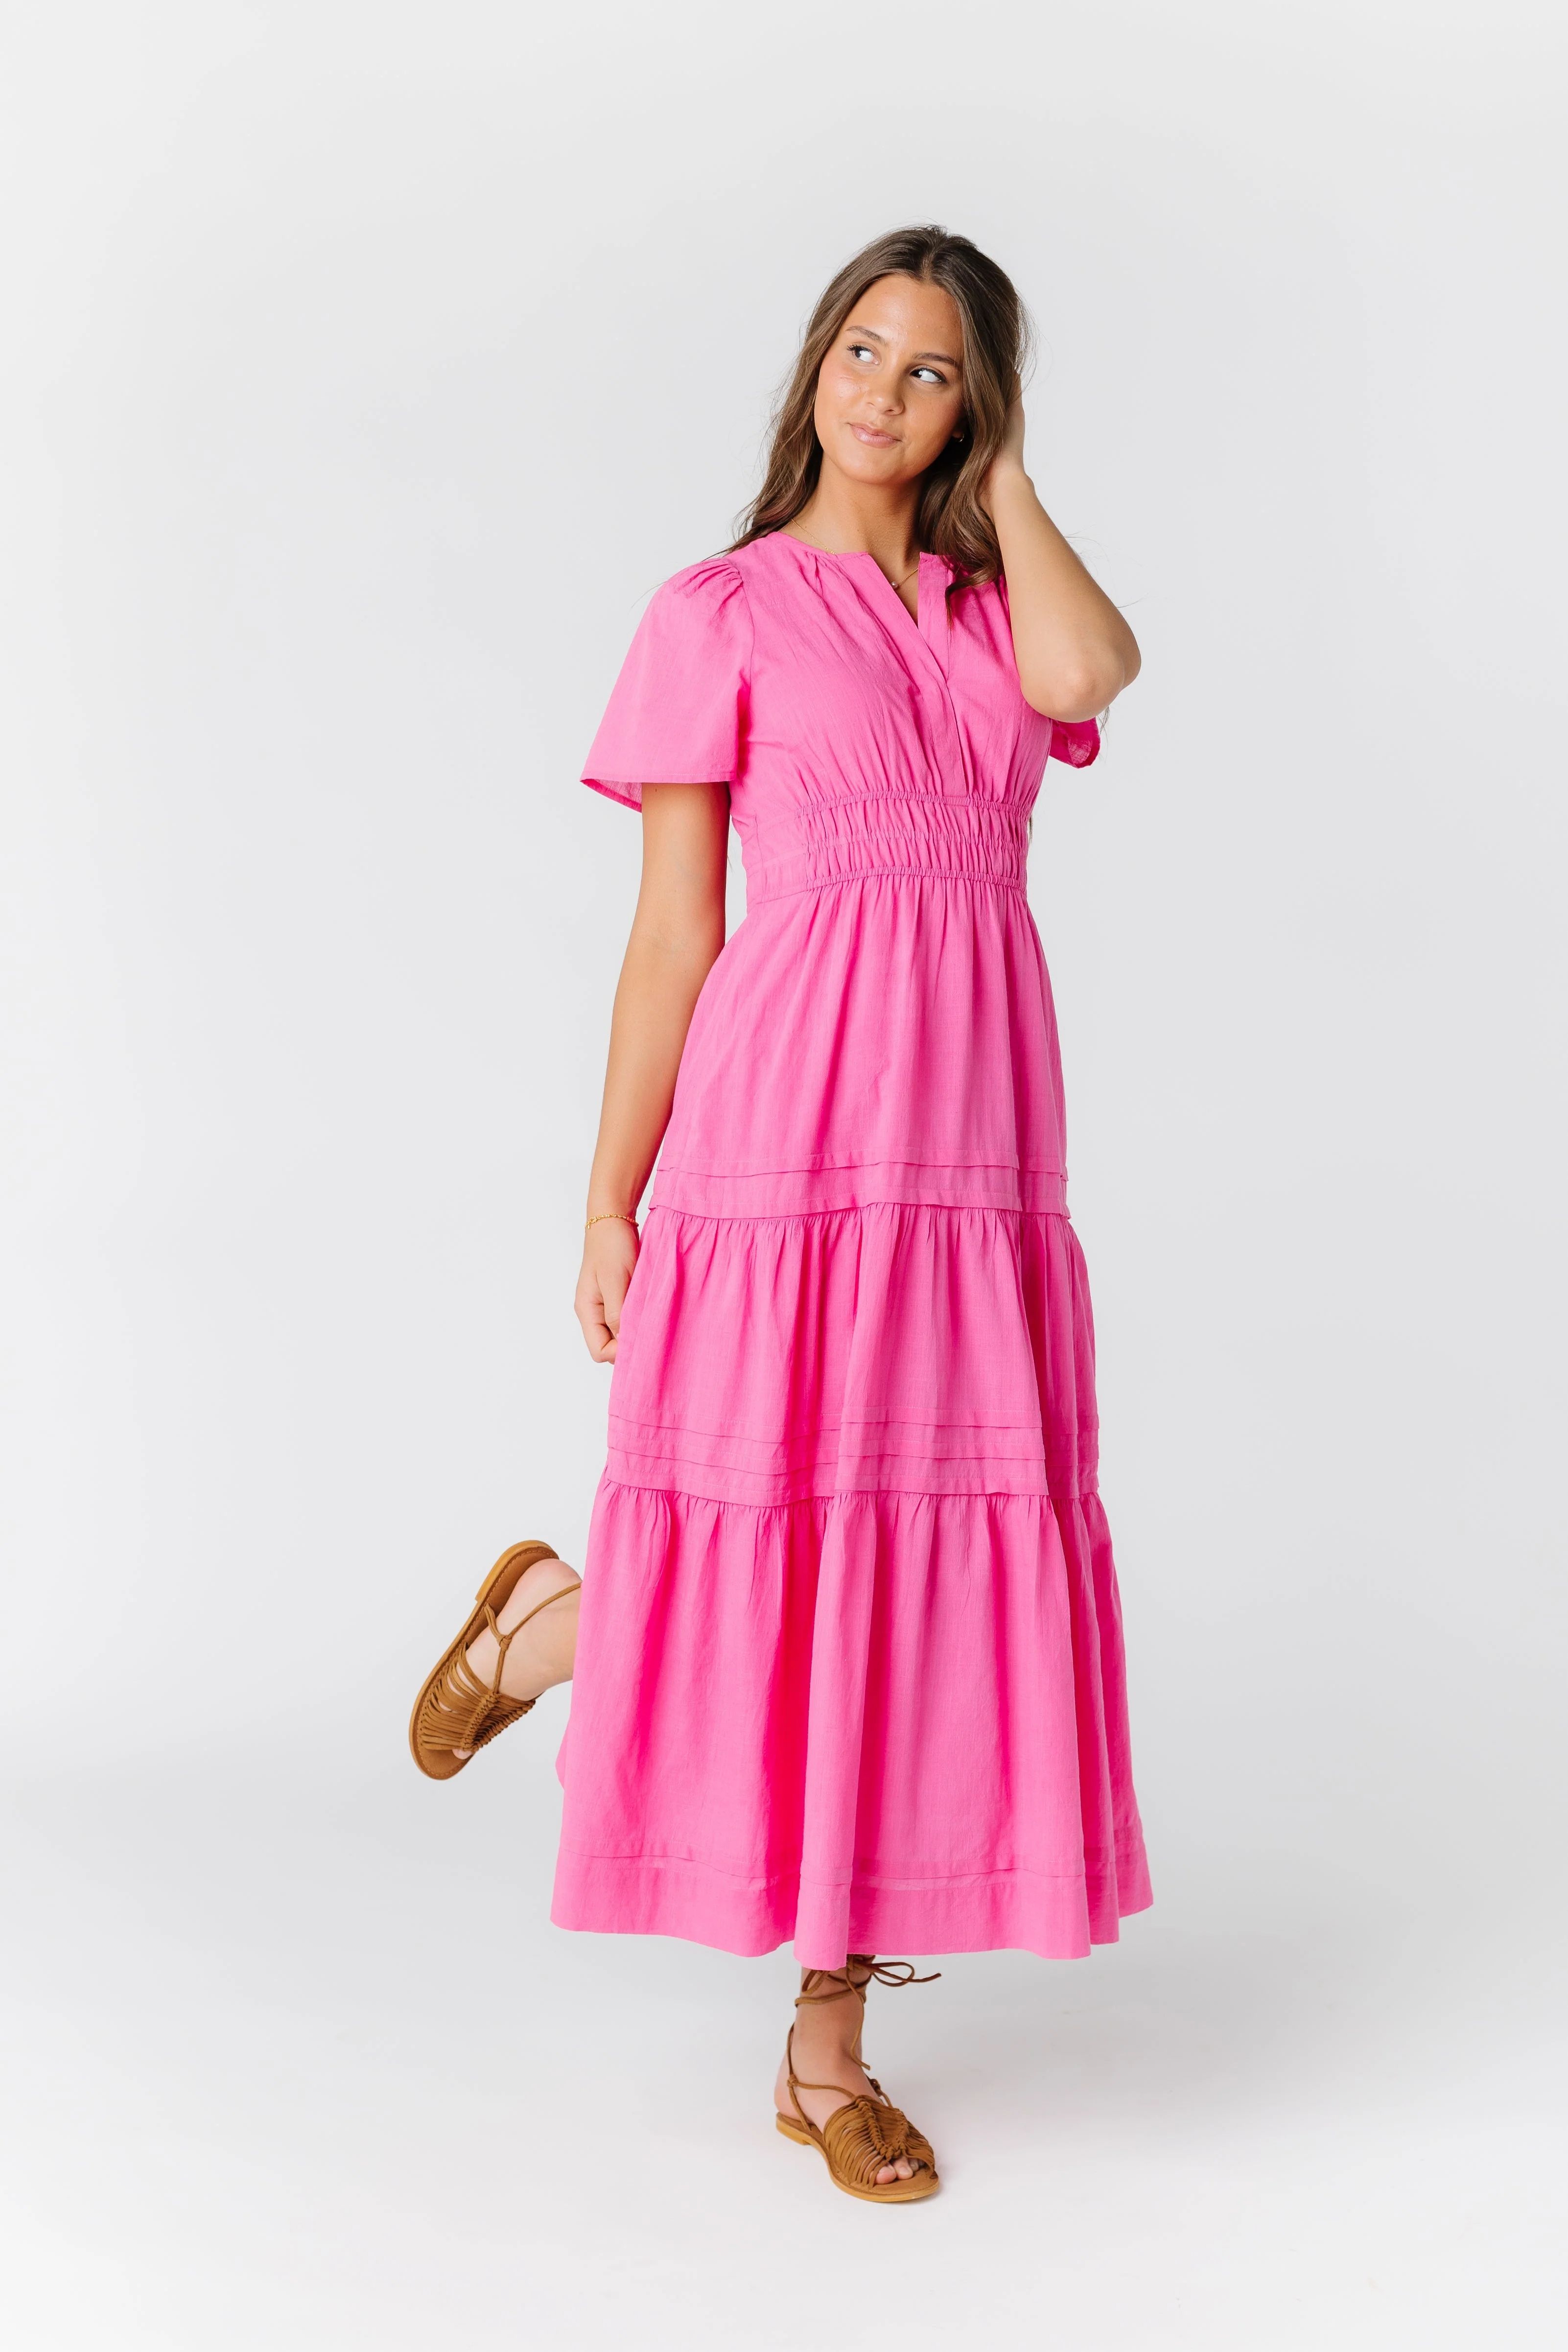 The Shae Dress: Stylish Short Sleeve Midi Dress for Summer | Called To Surf